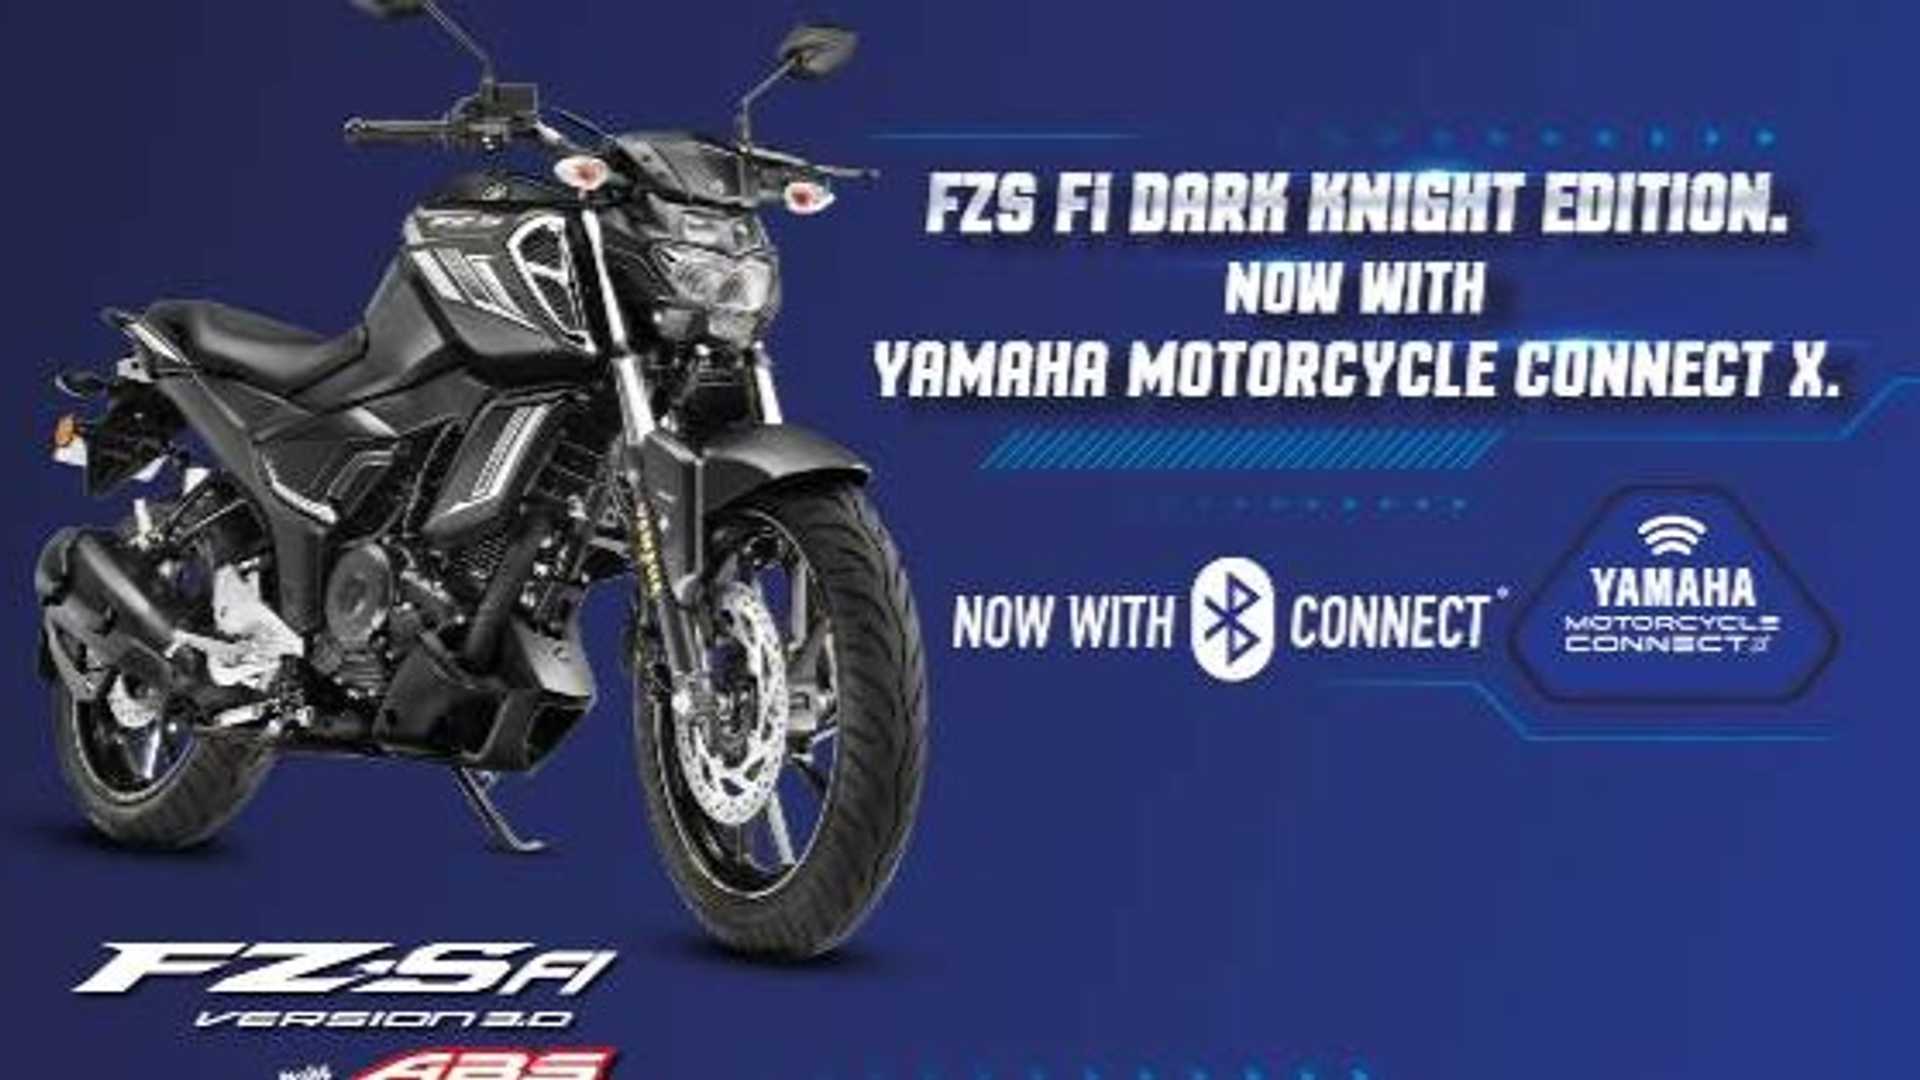 Yamaha Motorcycle Connect X
- also in the App MOTORCYCLE NEWS